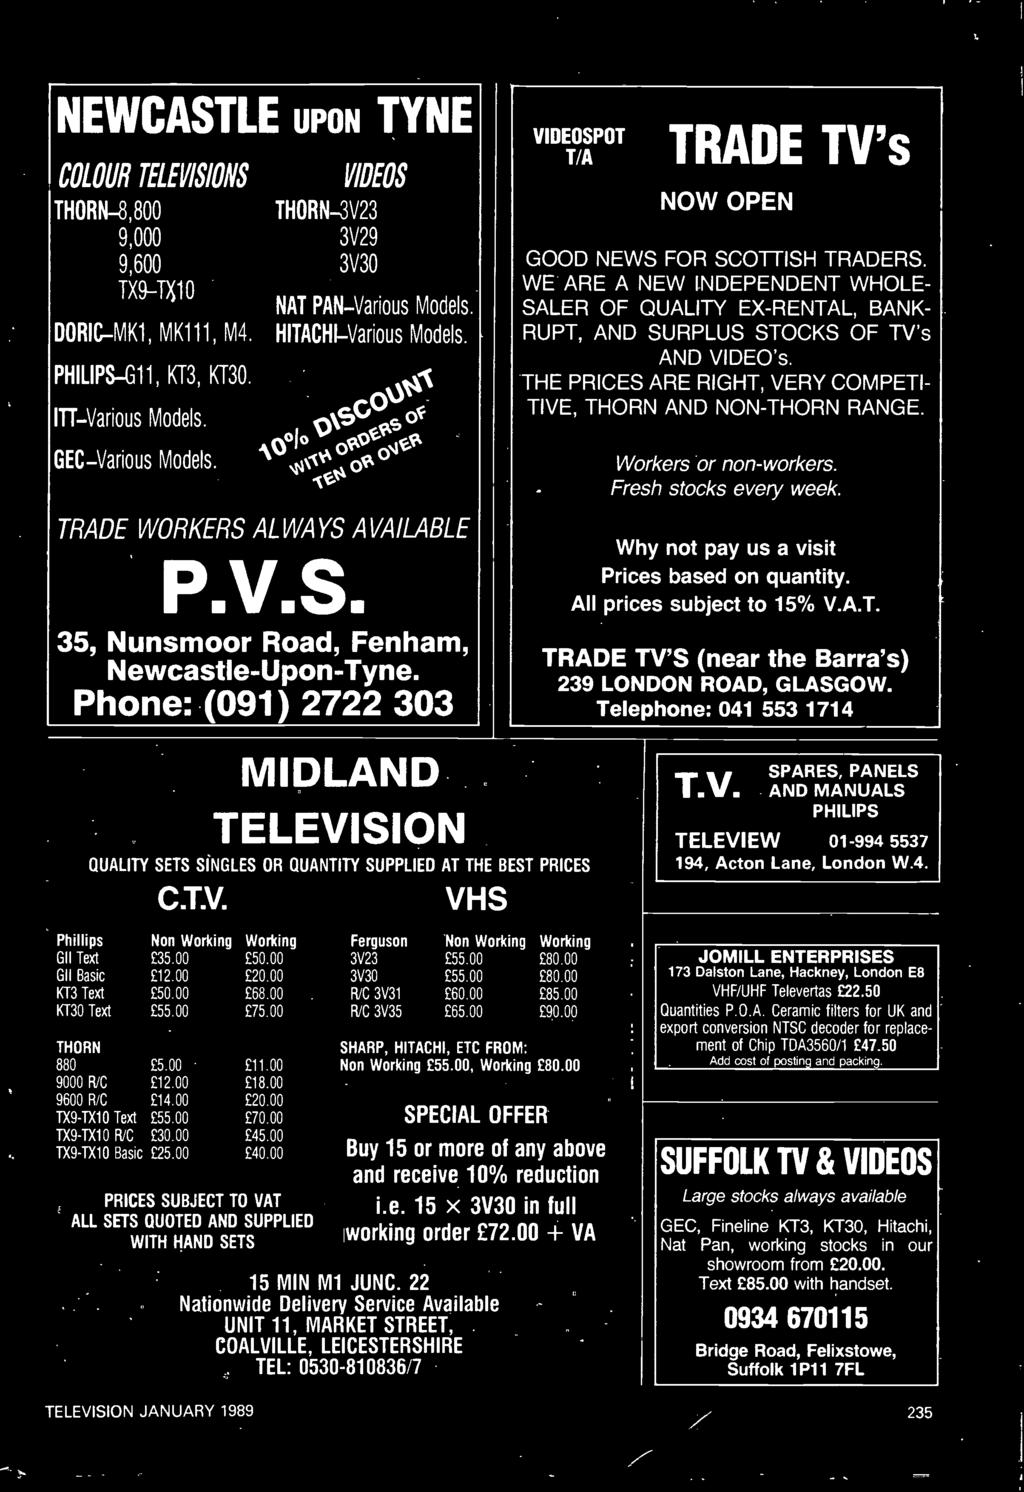 Phone: (091) 2722 303 MIDLAND TELEVISION QUALITY SETS SINGLES OR QUANTITY SUPPLIED AT THE BEST PRICES C.T.V. VHS Why not pay us a visit Prices based on quantity. All prices subject to 15% V.A.T. TRADE TV'S (near the Barra's) 239 LONDON ROAD, GLASGOW.